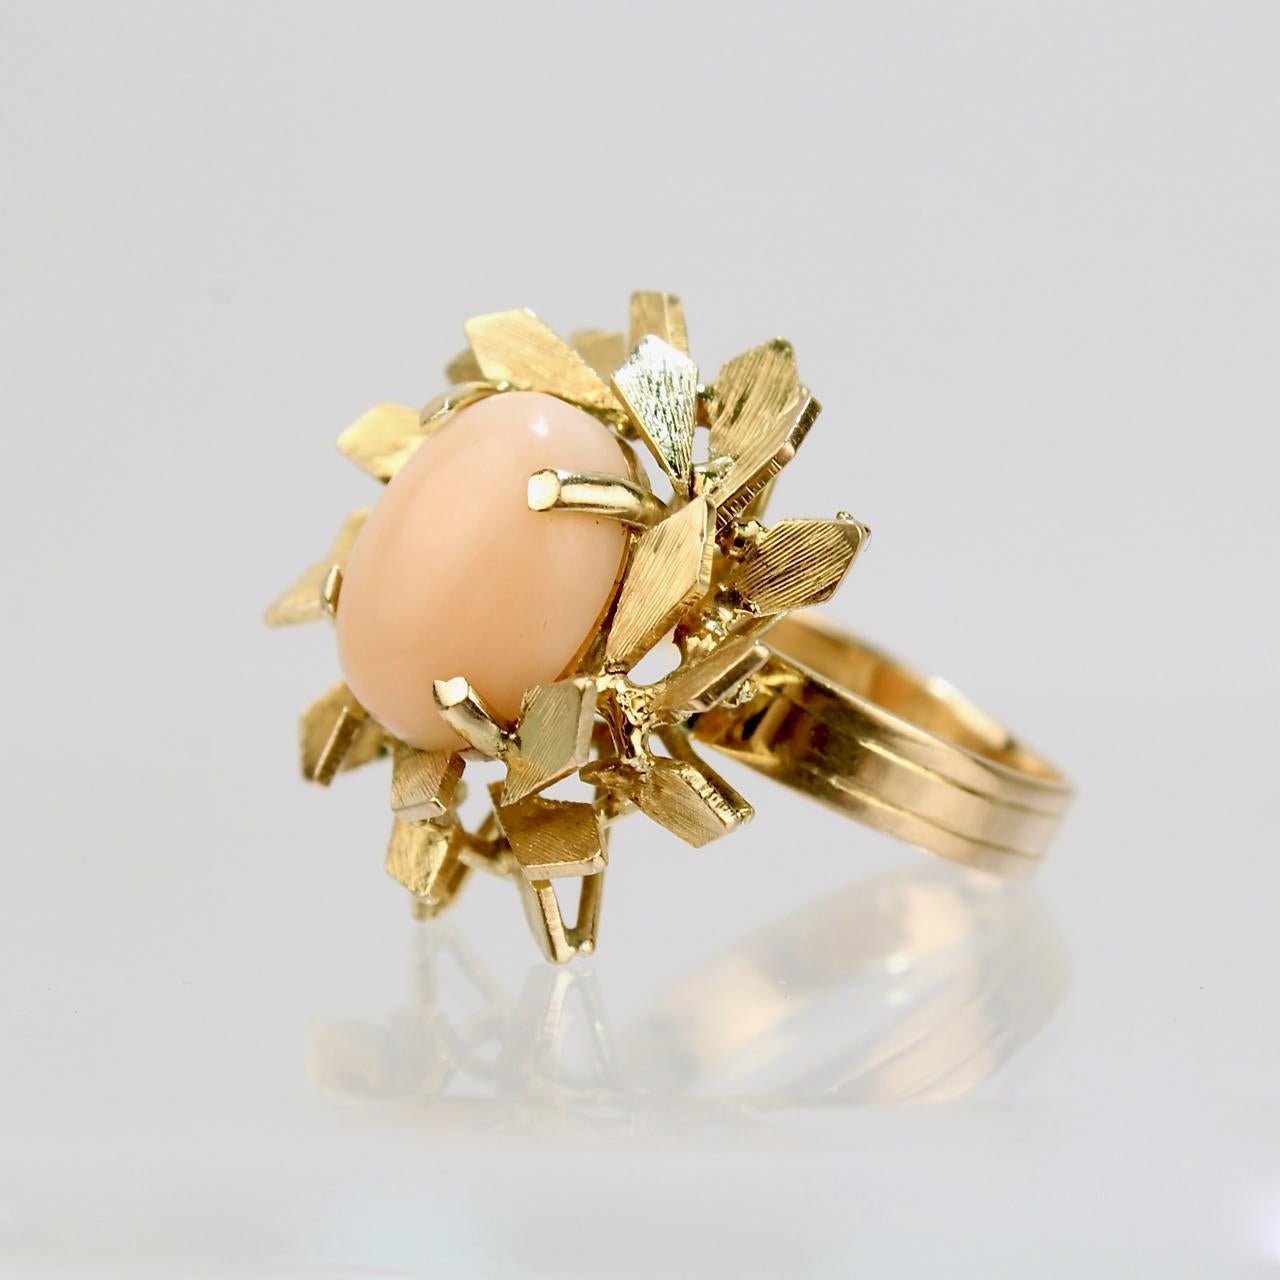 A very fine coral and 14k gold floral ring.

With a pink or peach colored oval coral cabochon prong center set and surrounded by 14 karat gold leaf patterns.

Date:
20th Century

Overall Condition:
It is in overall good, as-pictured, used estate